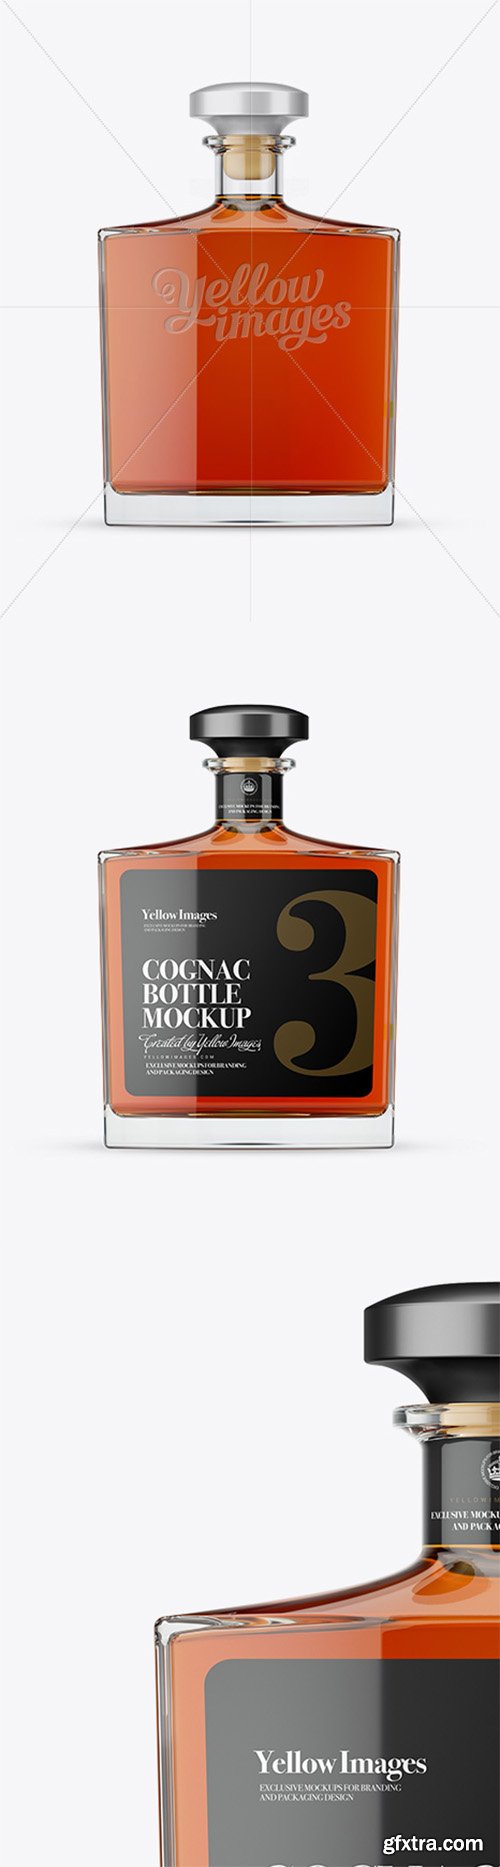 Square Clear Glass Bottle With Cognac Mockup 15639